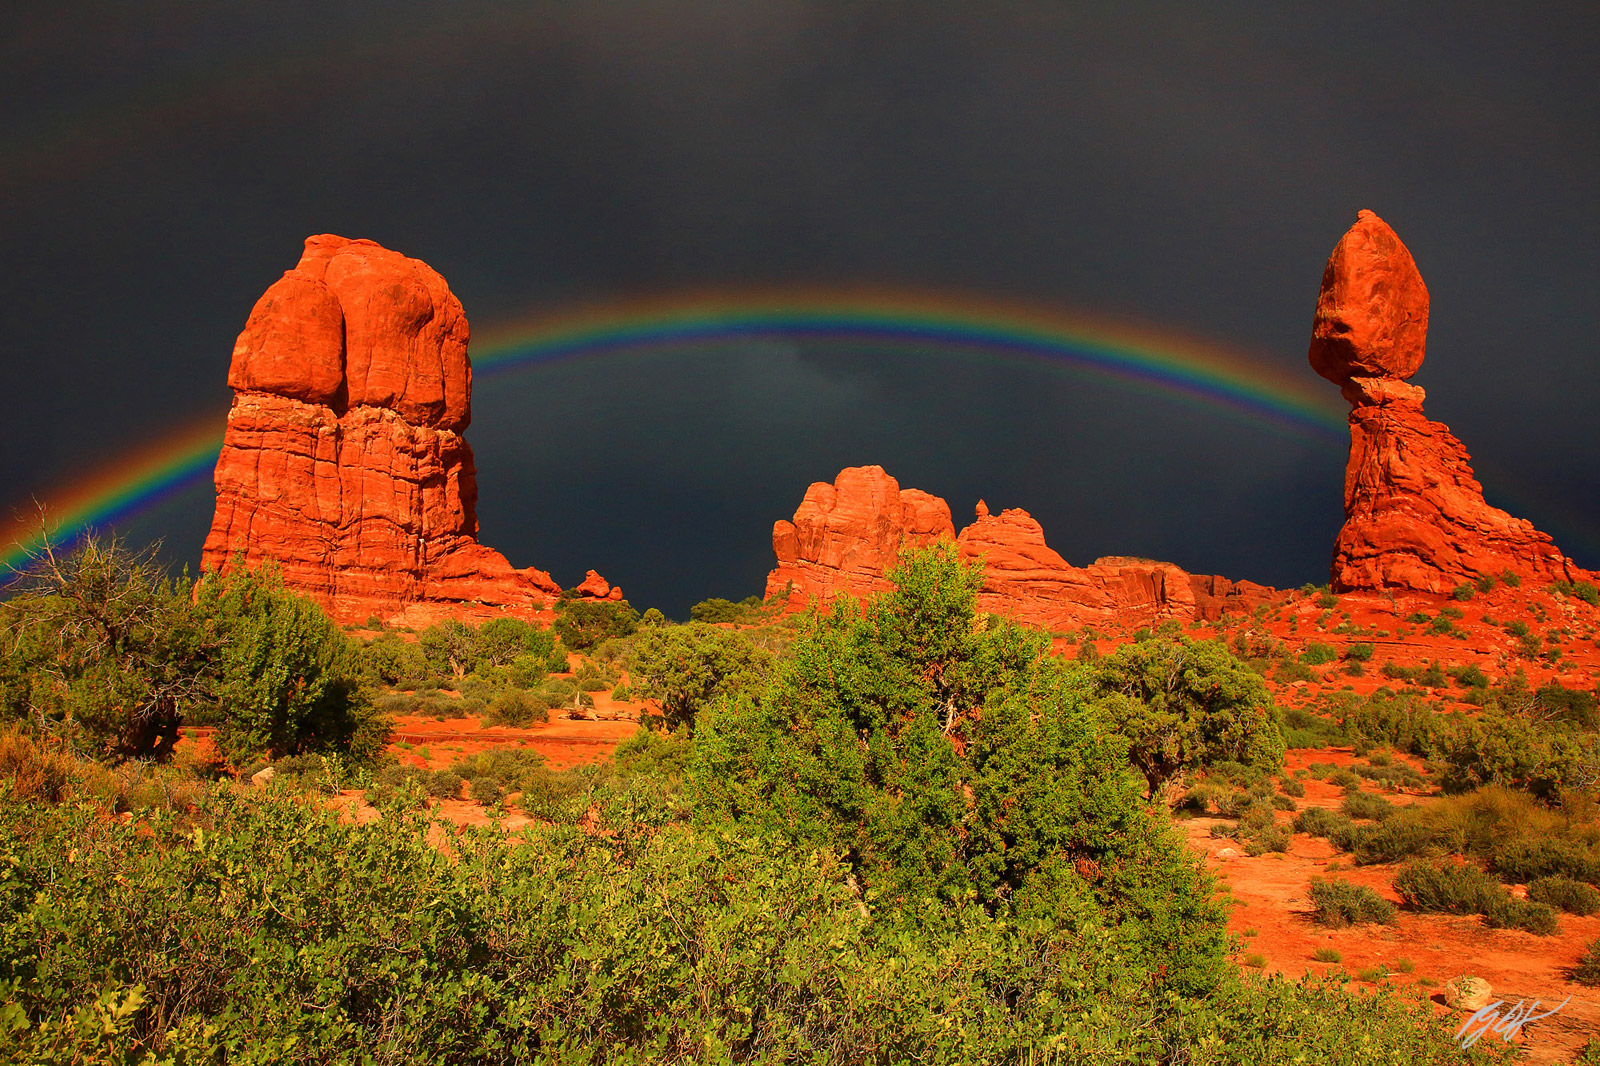 Rainbow over Balancing Rock after a Storm in Arches National Park in Utah